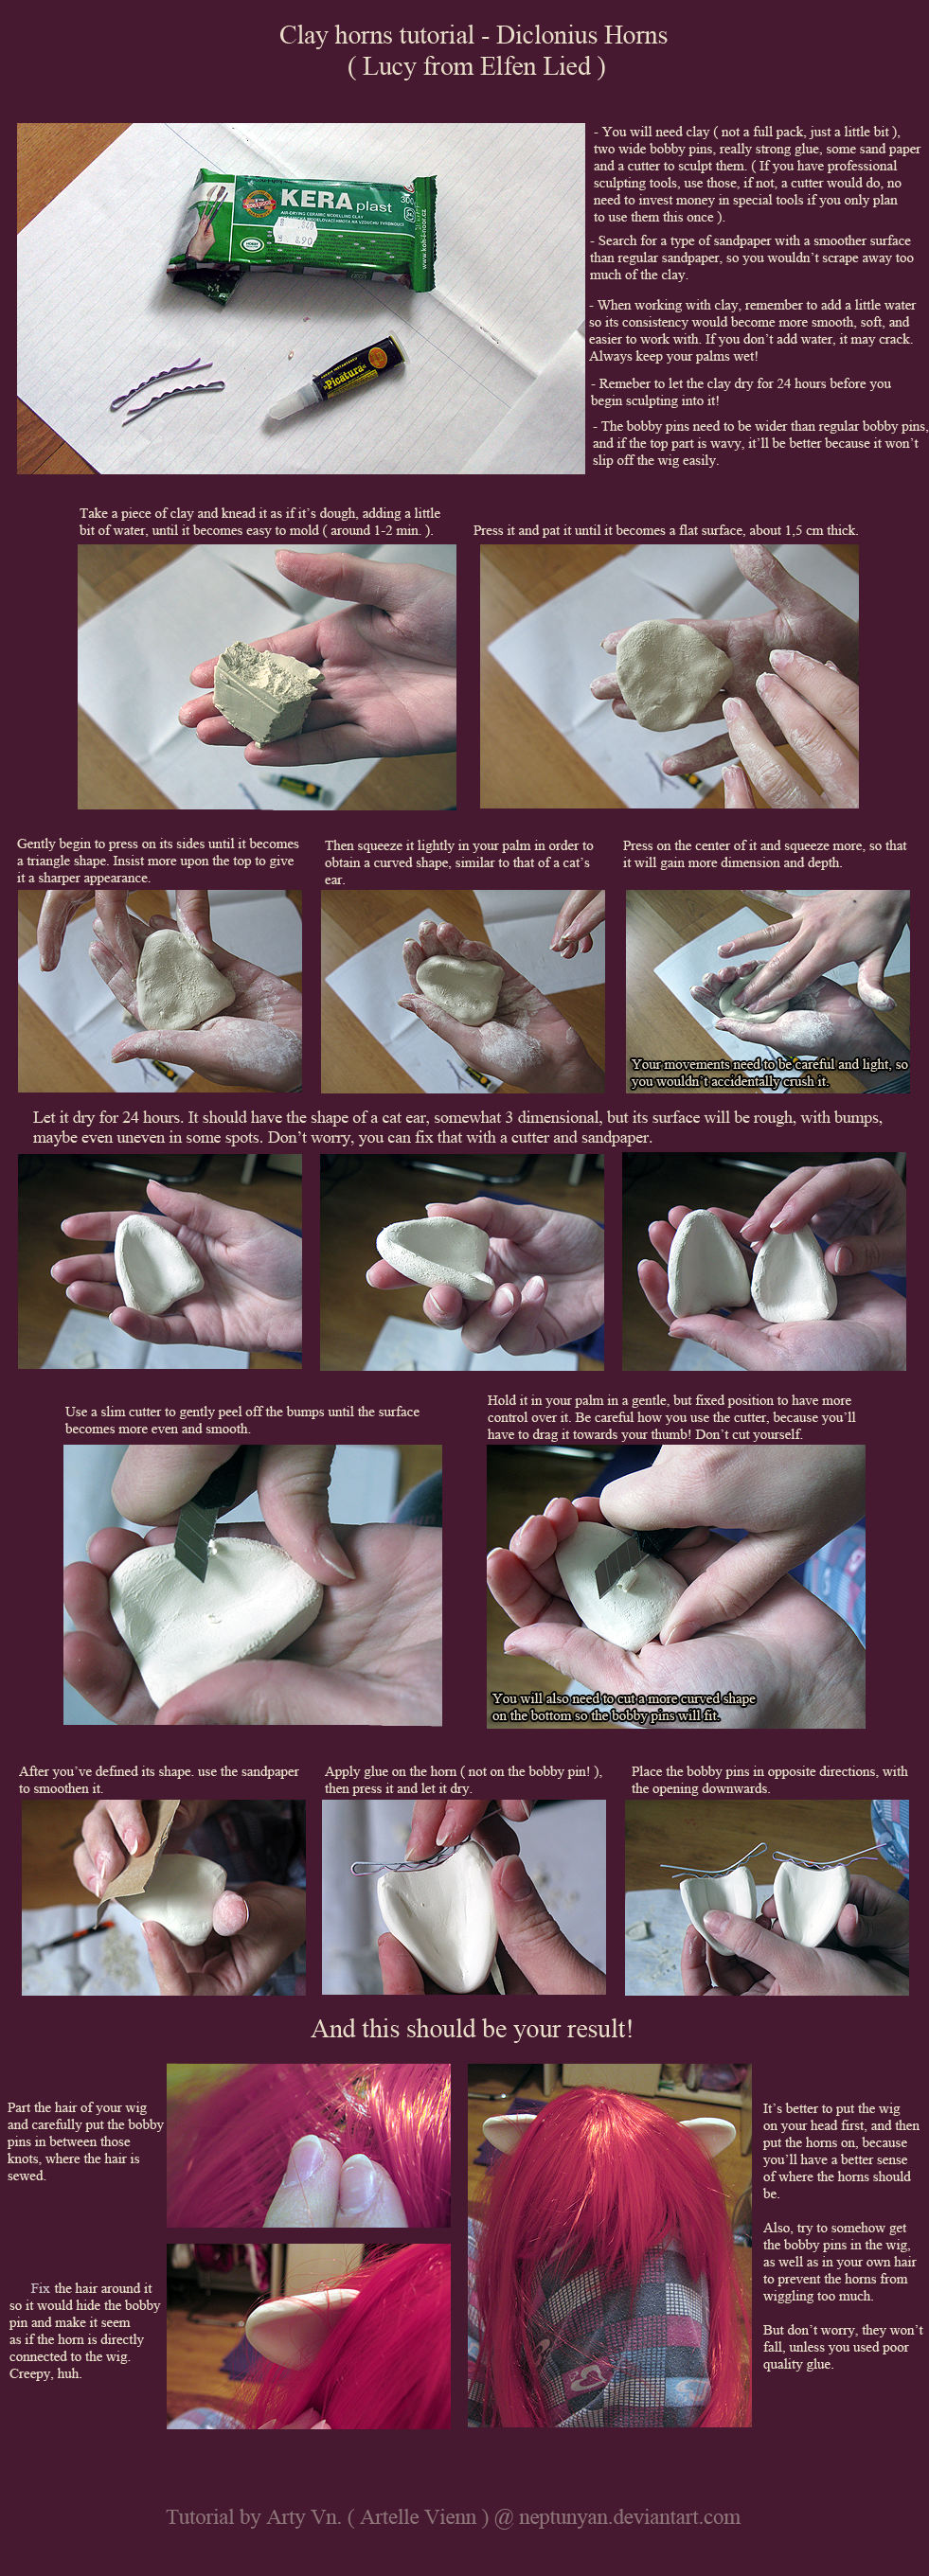 Clay horns tutorial - Lied / Lucy. by neptunyan on DeviantArt